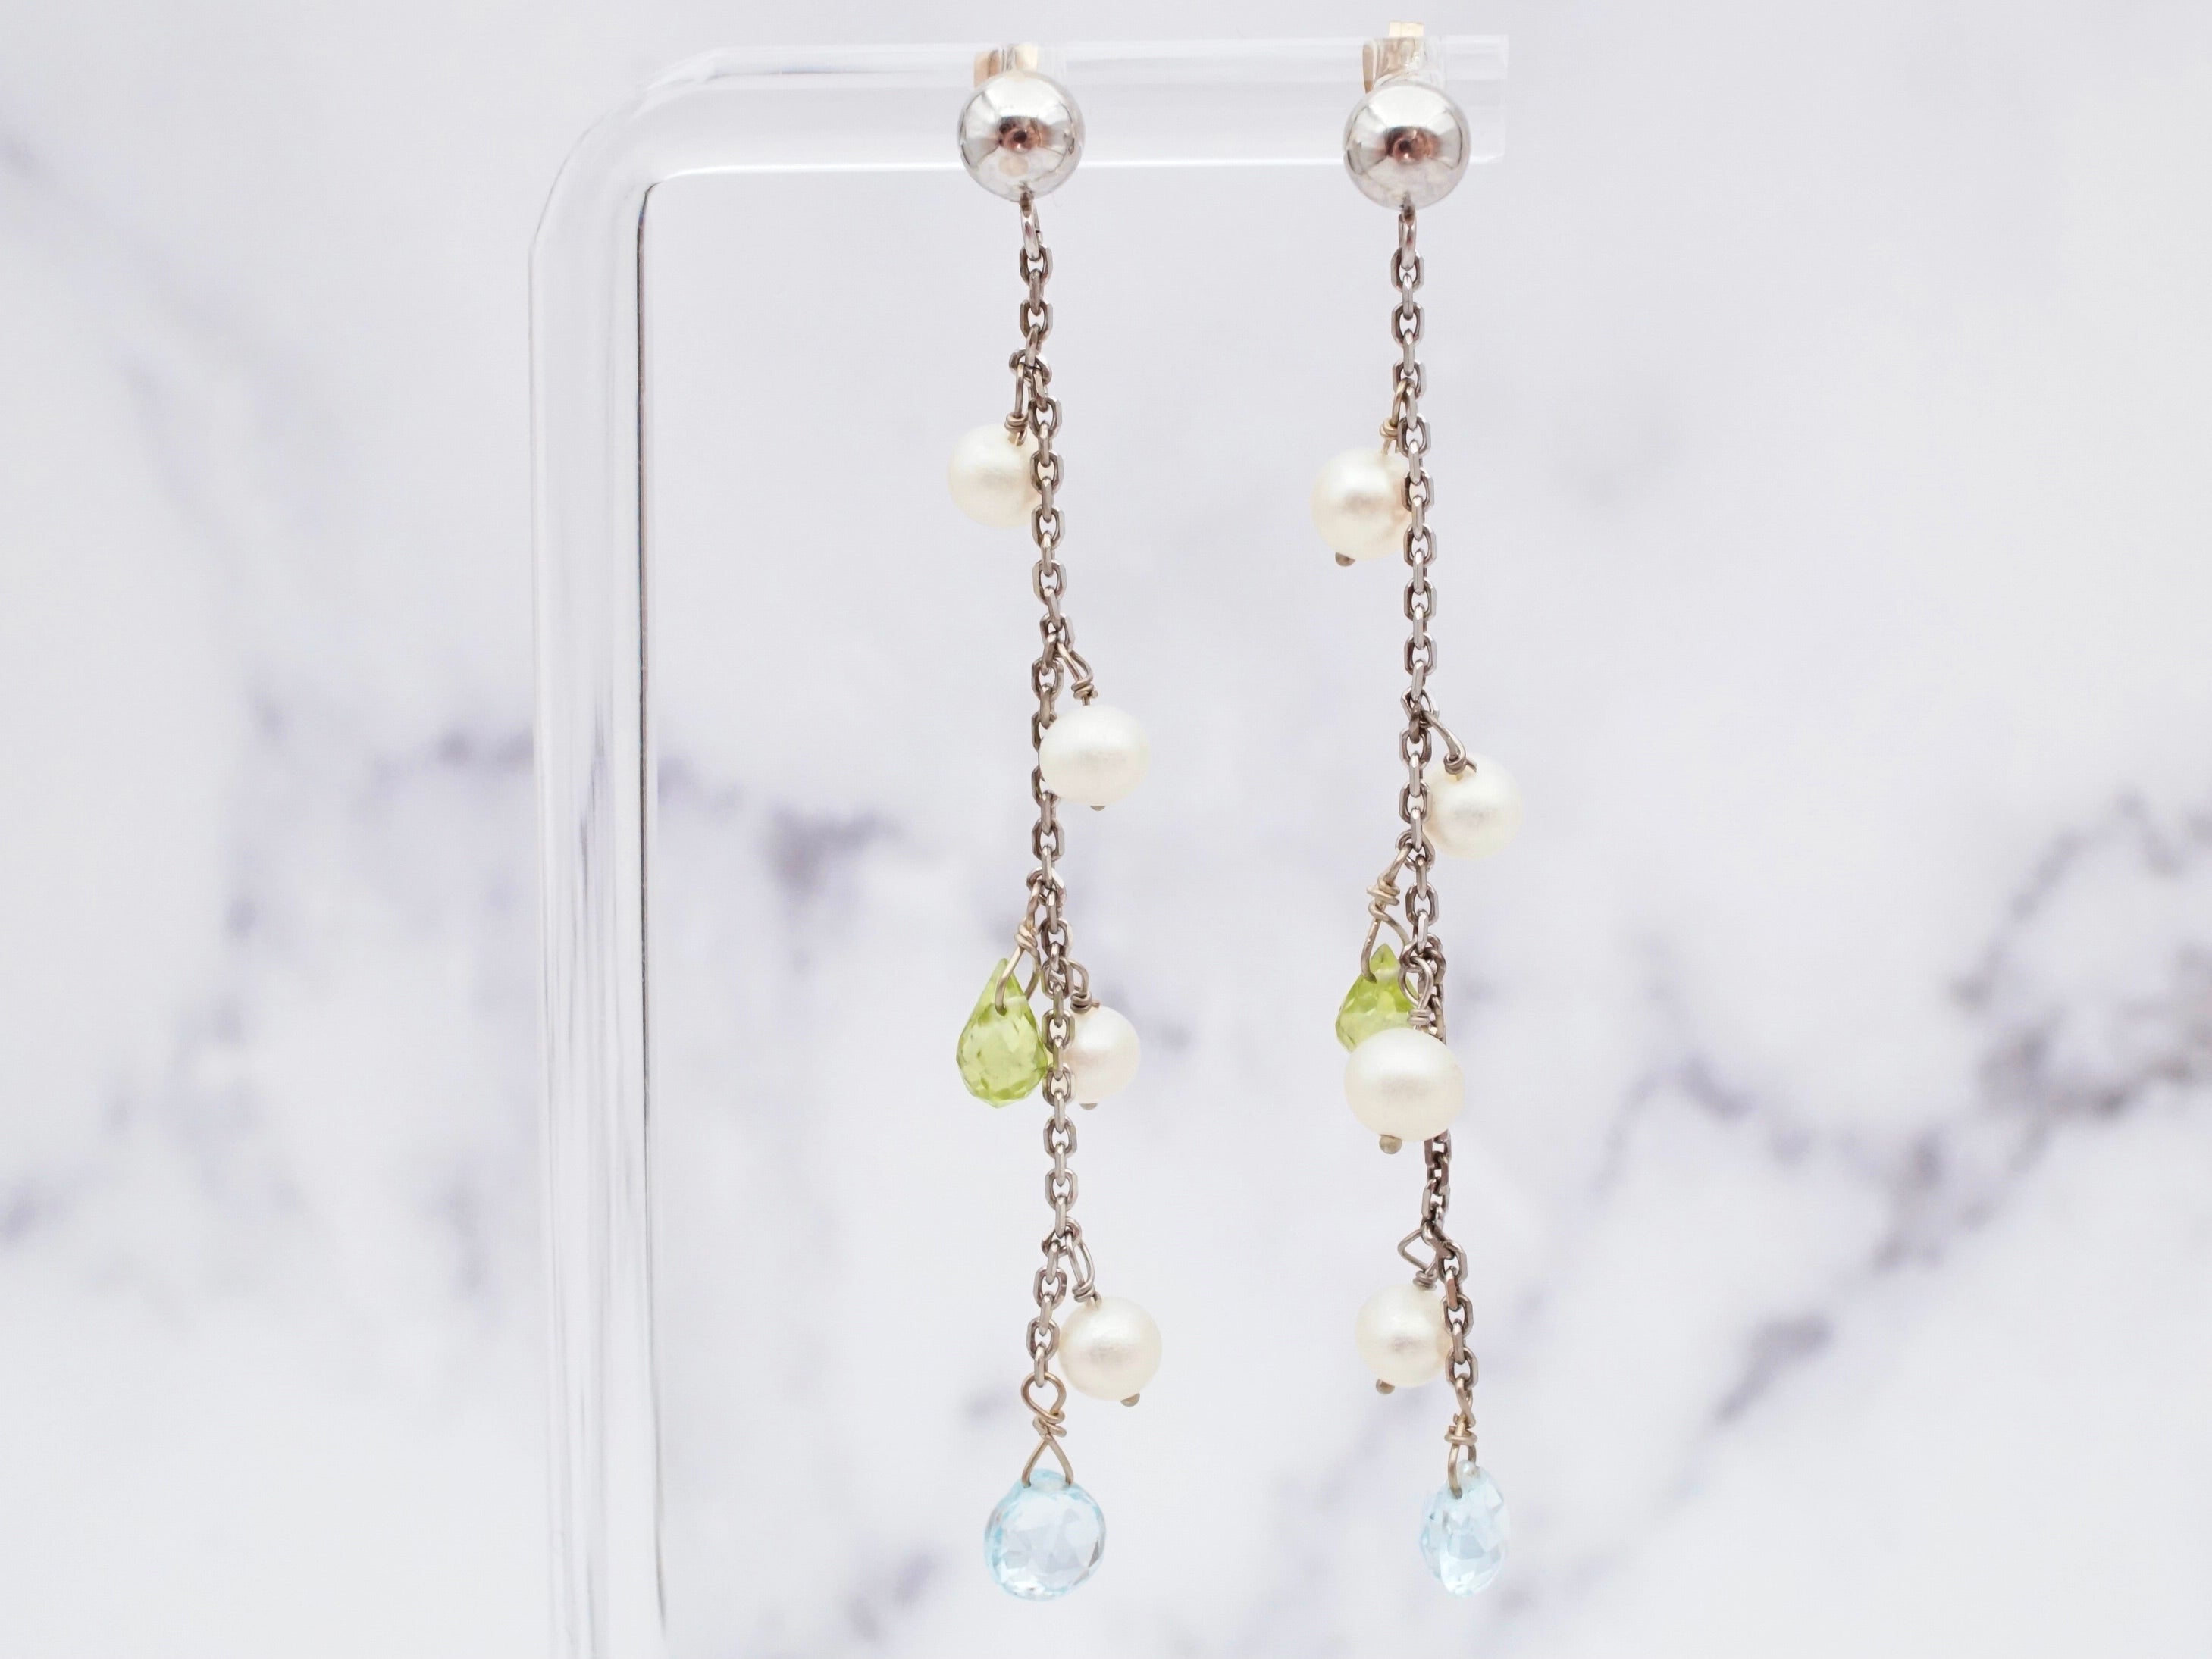 Vintage 14k white gold, cultured pearl, faceted peridot, and blue topaz drop chain earrings